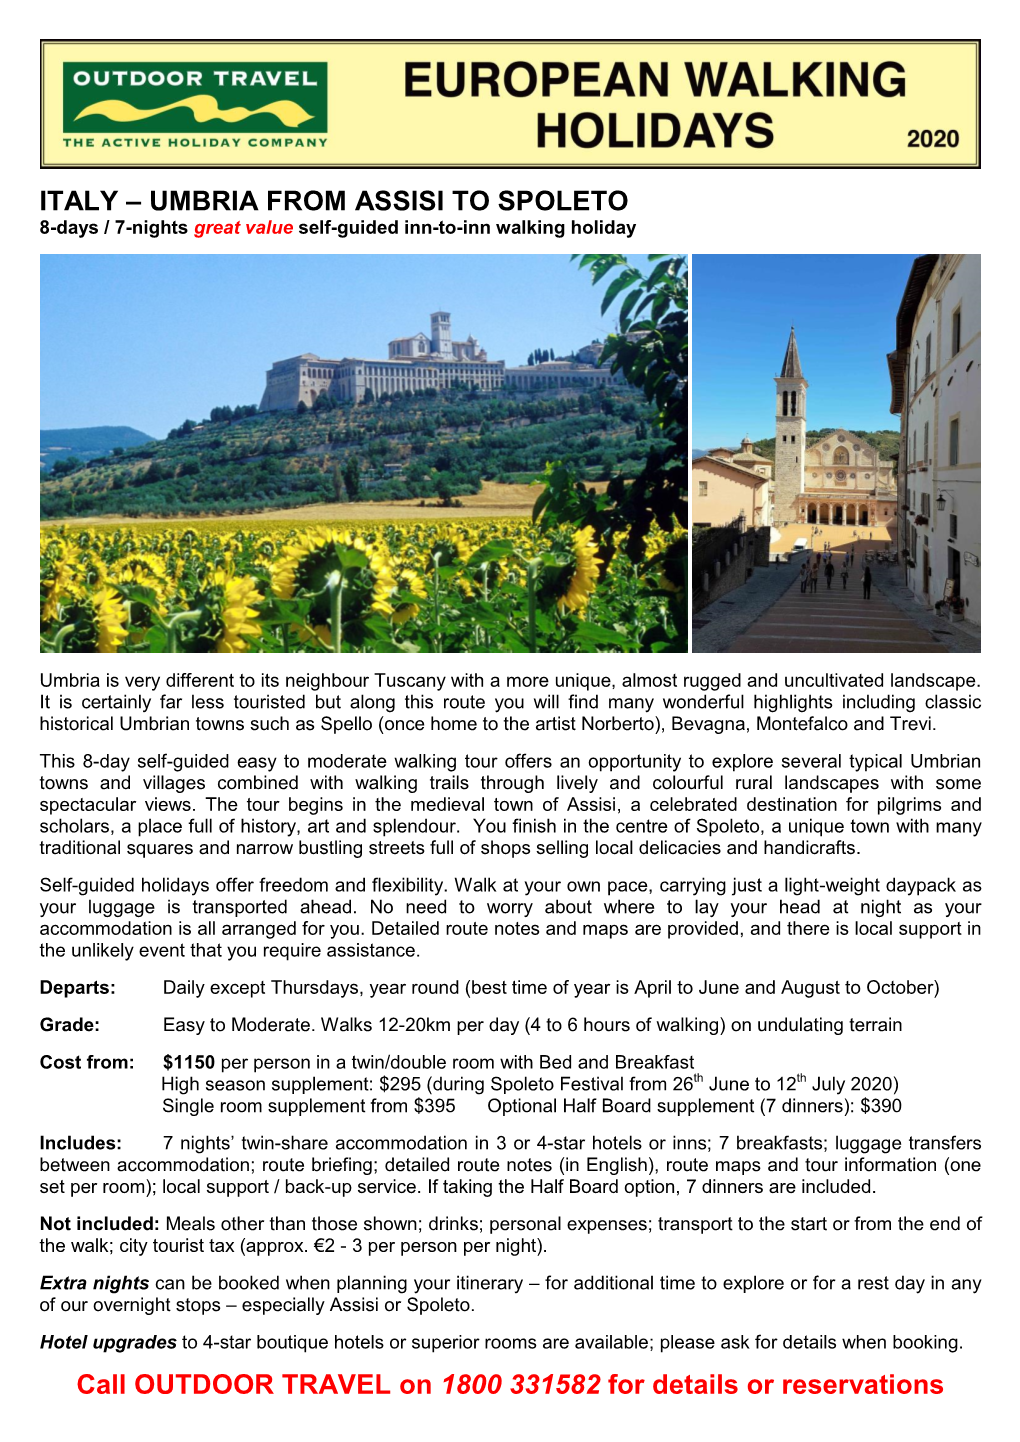 ITALY – UMBRIA from ASSISI to SPOLETO 8-Days / 7-Nights Great Value Self-Guided Inn-To-Inn Walking Holiday